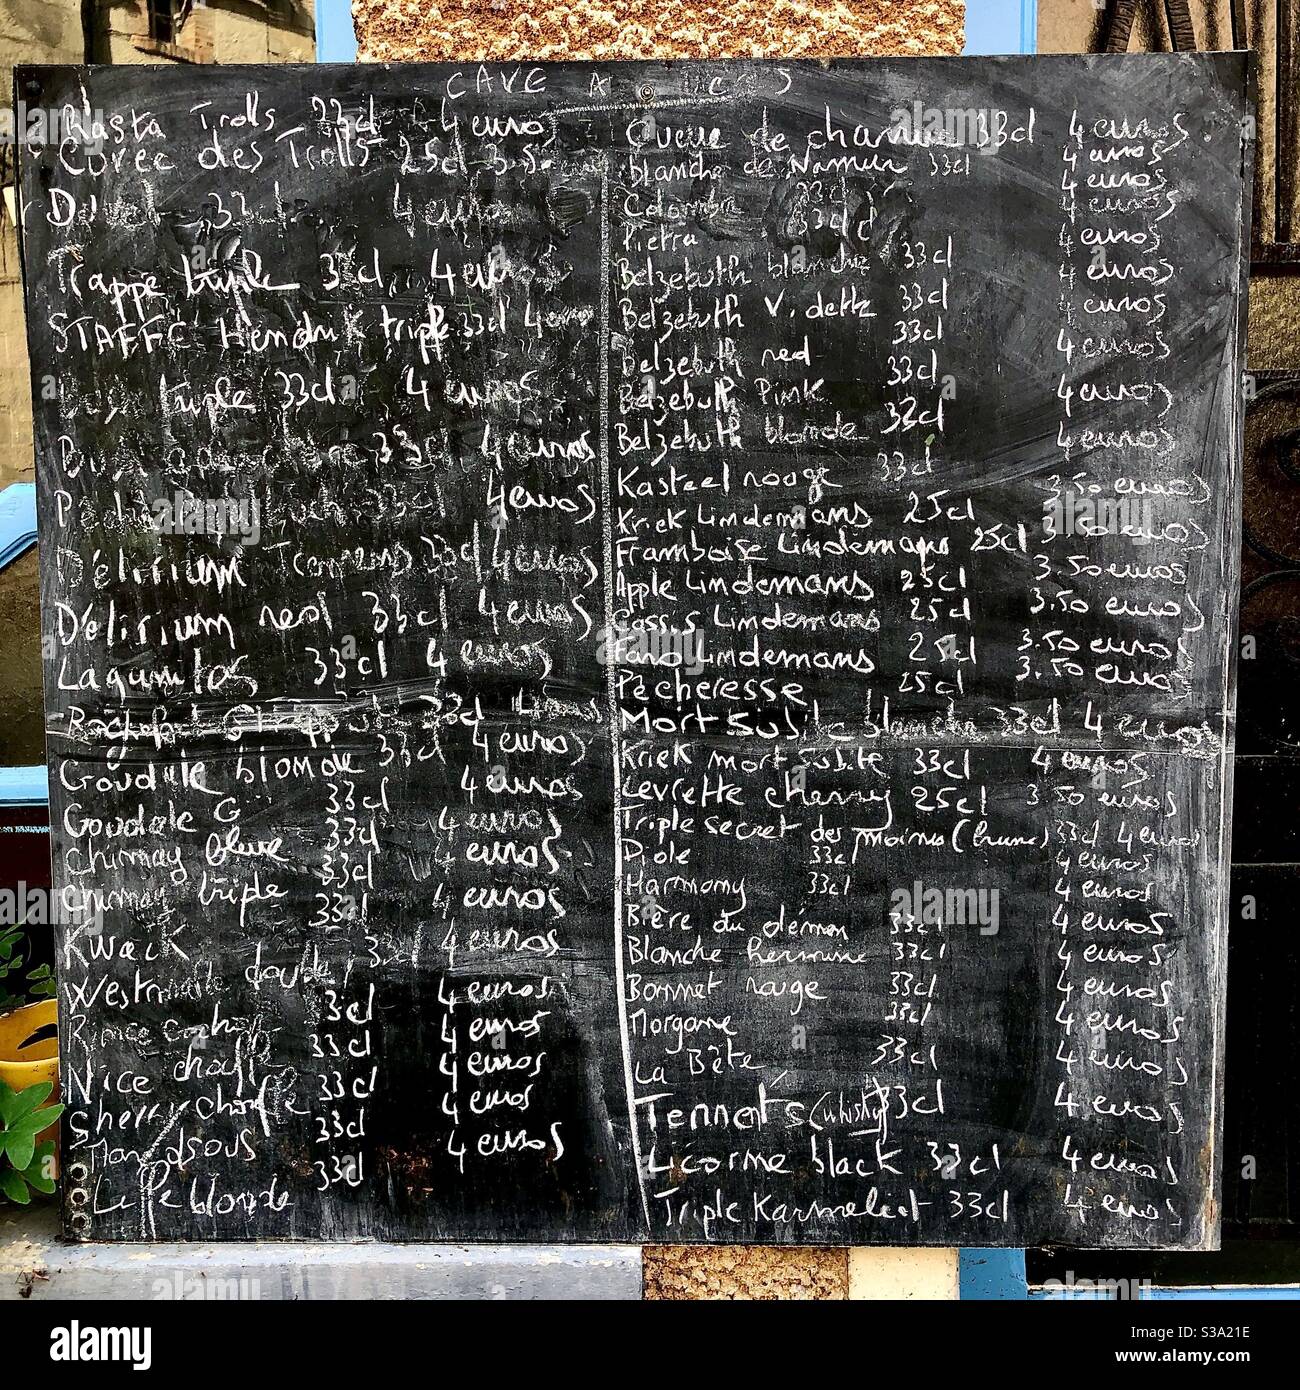 Blackboard with names of more than 50 available beers chalked-up at bar in central France. Stock Photo